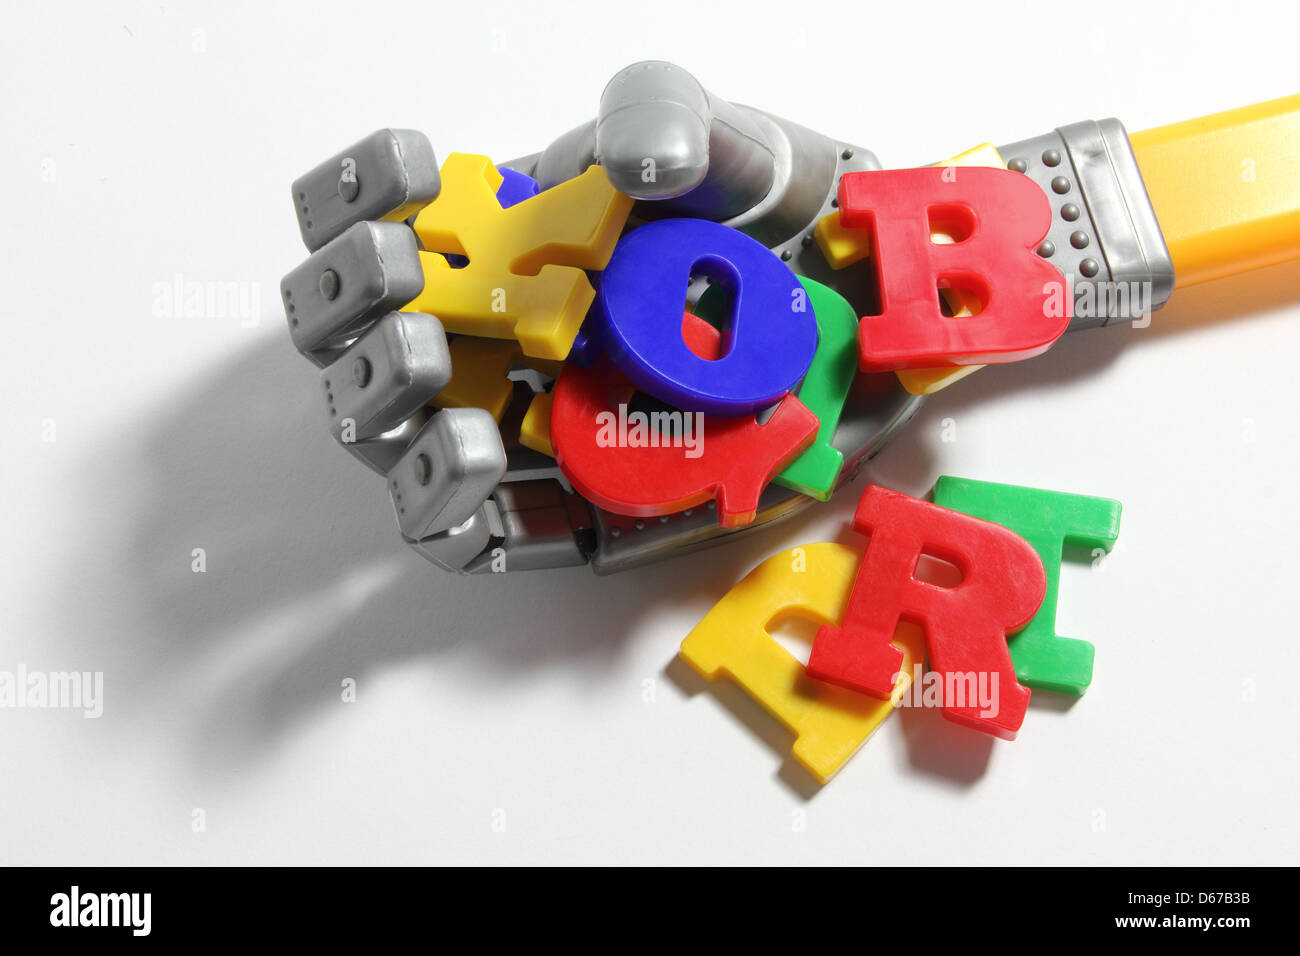 Toy Robot Hand with Plastic Alphabets Stock Photo